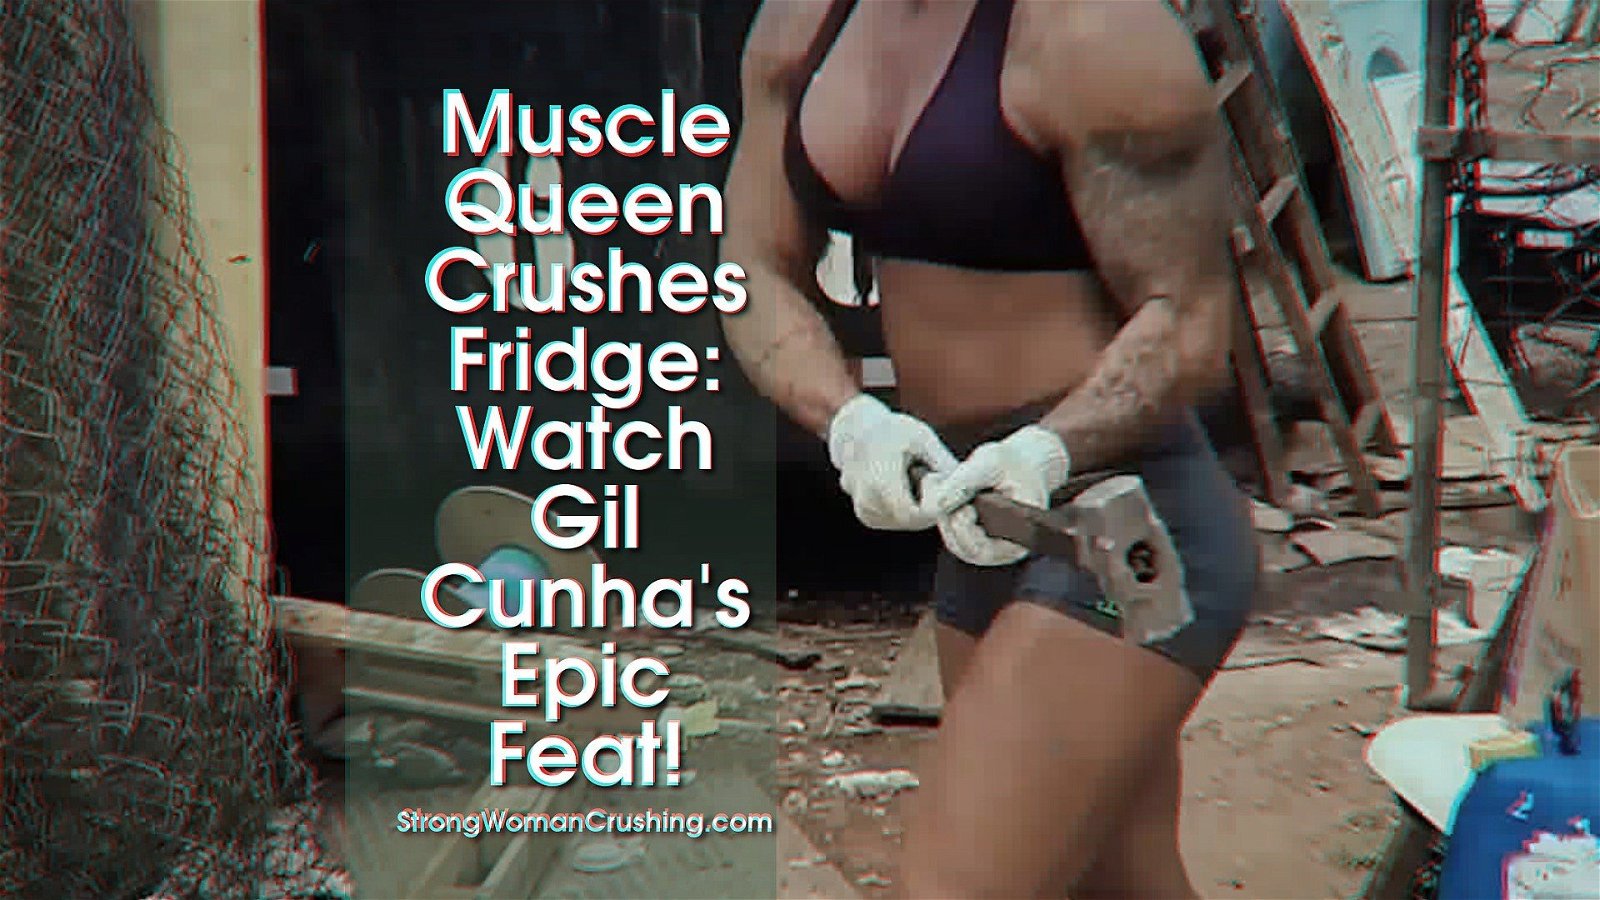 Watch the Photo by MusclegirlStrength with the username @MusclegirlStrength, who is a brand user, posted on March 4, 2024 and the text says 'Muscle Queen Crushes Fridge: Watch Gil Cunha's Epic Feat!
Full Video: https://bit.ly/32D3Uss

Embrace the power and beauty of muscular female bodybuilders as they showcase their strength by crushing things, bending metal, lifting cars, and flexing..'